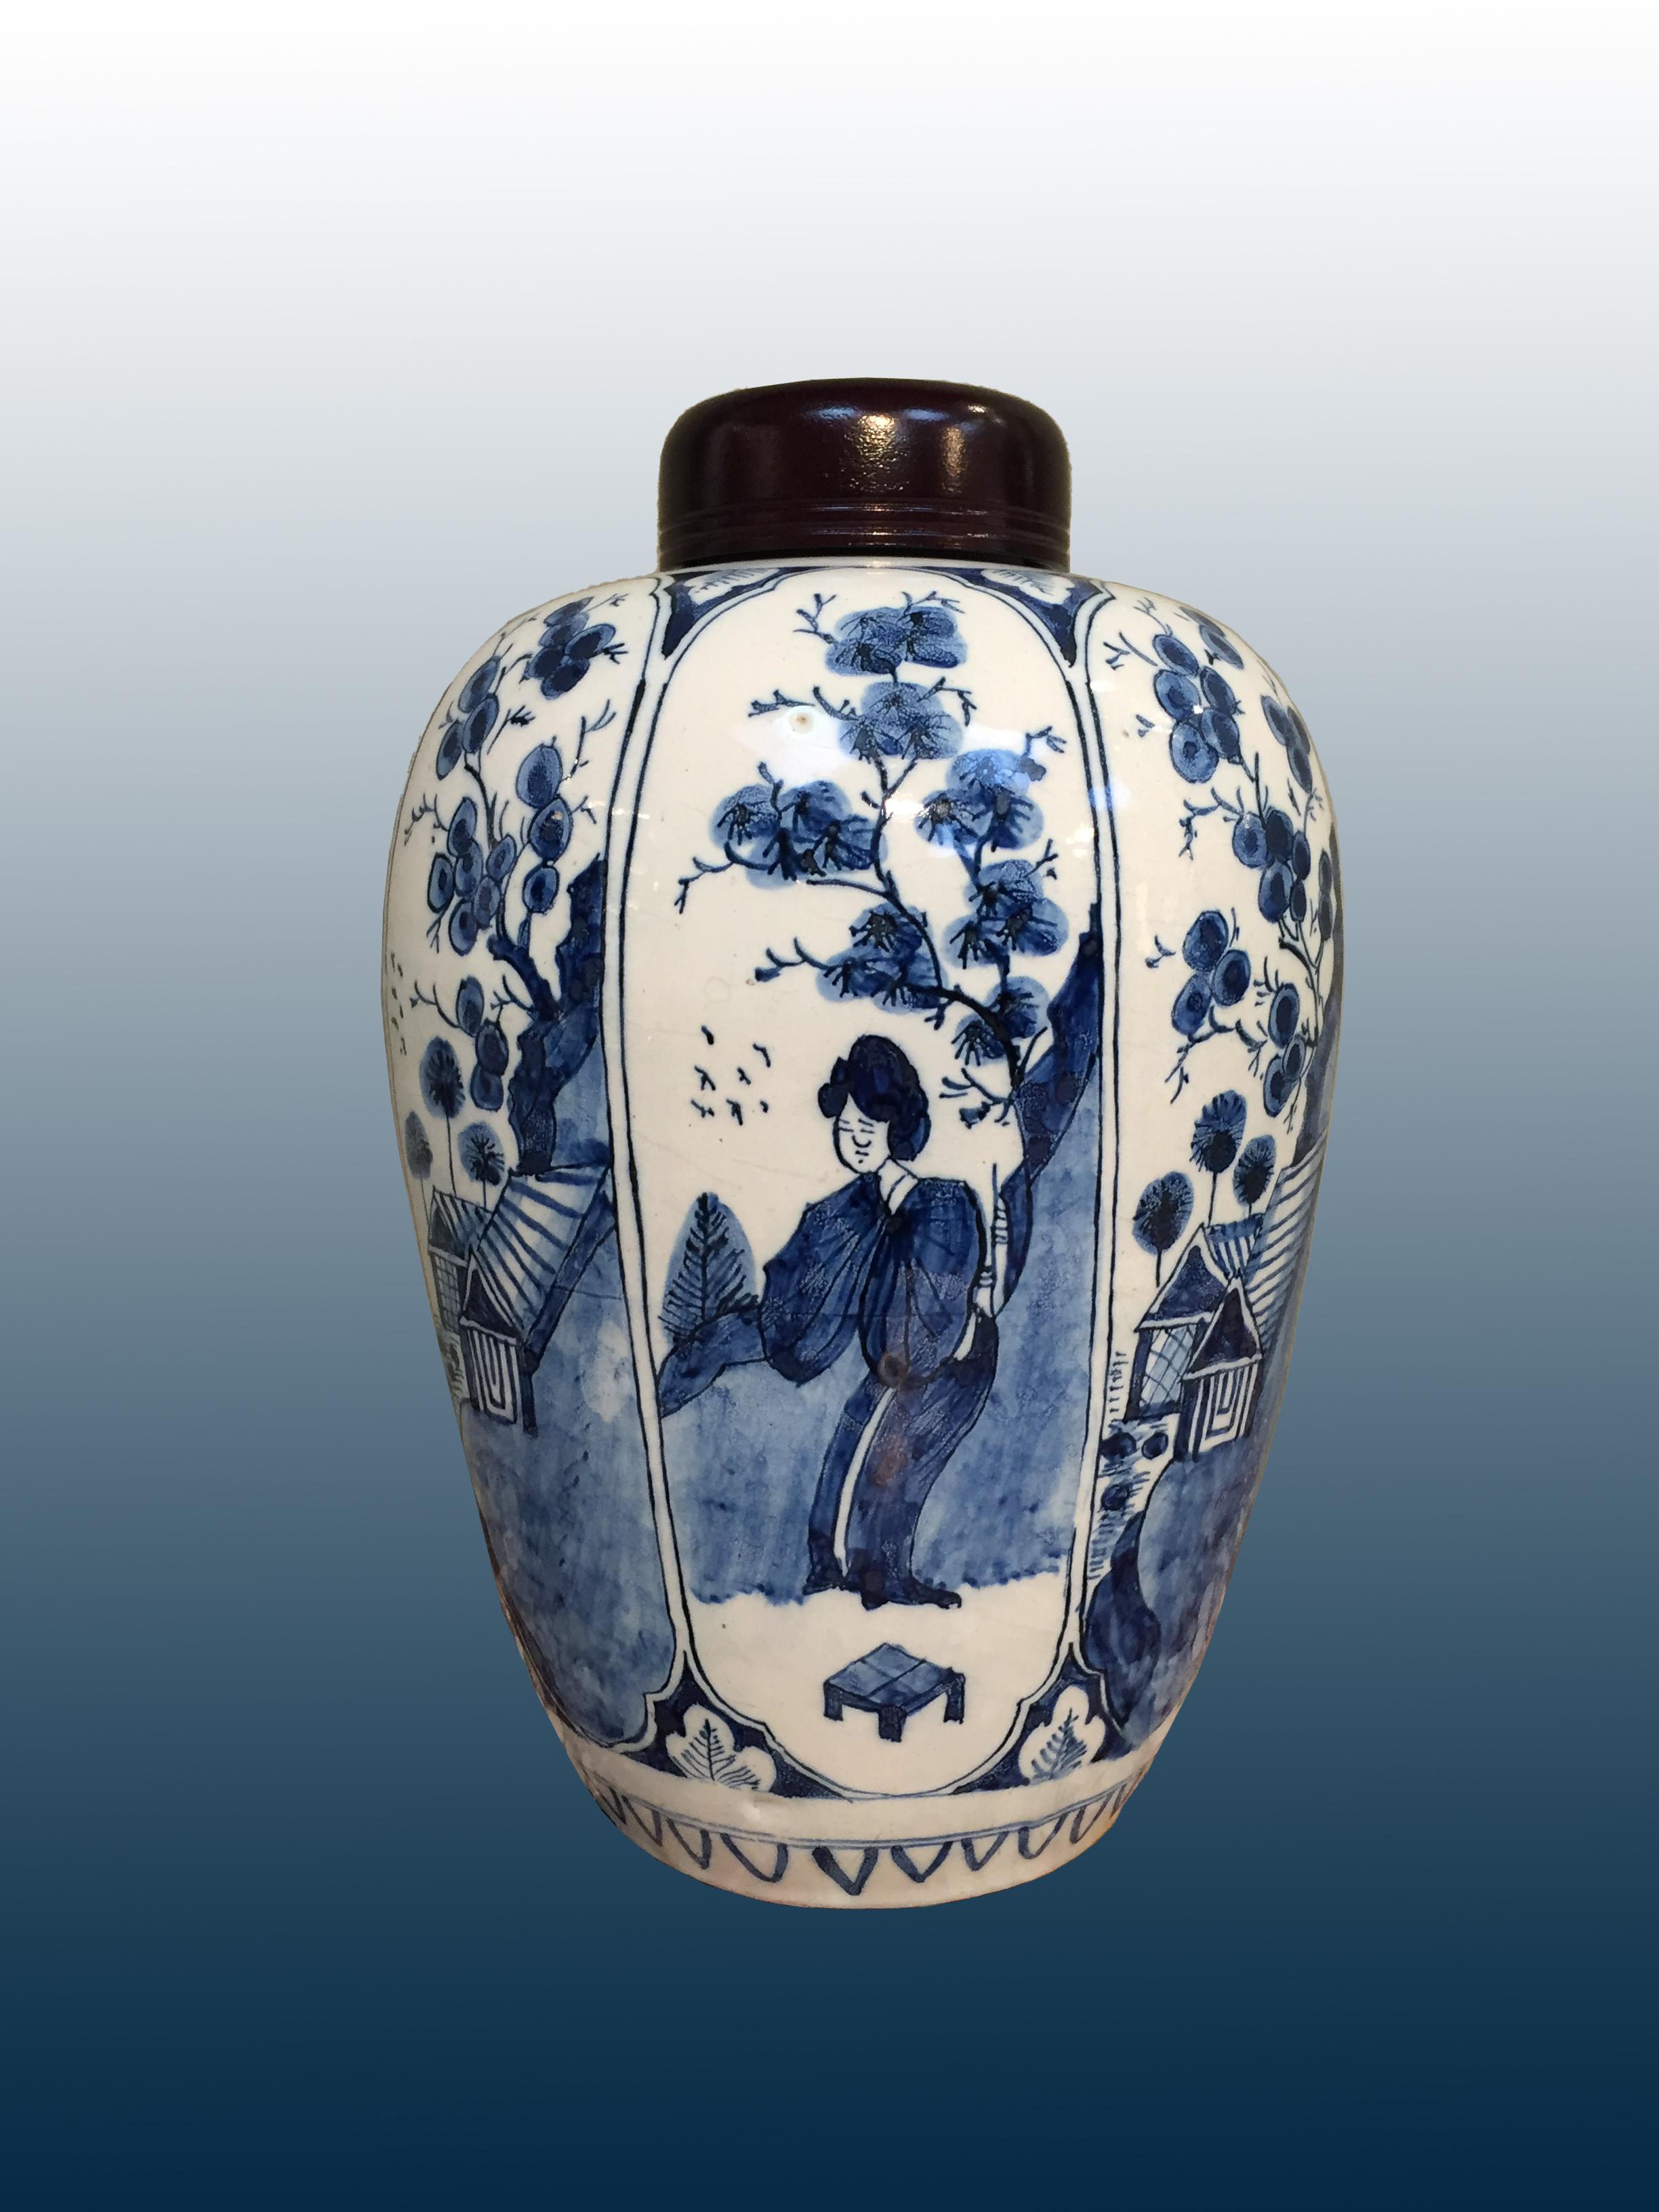 An Early Dutch Delftware lidded jar with chinoiserie decoration.

Origine: Delft, The Netherlands
Date: Early 18th century
Workshop: Unknown.

A genuine blue and white lidded jar with chinoiserie decoration in Kangxi style, with so-called long